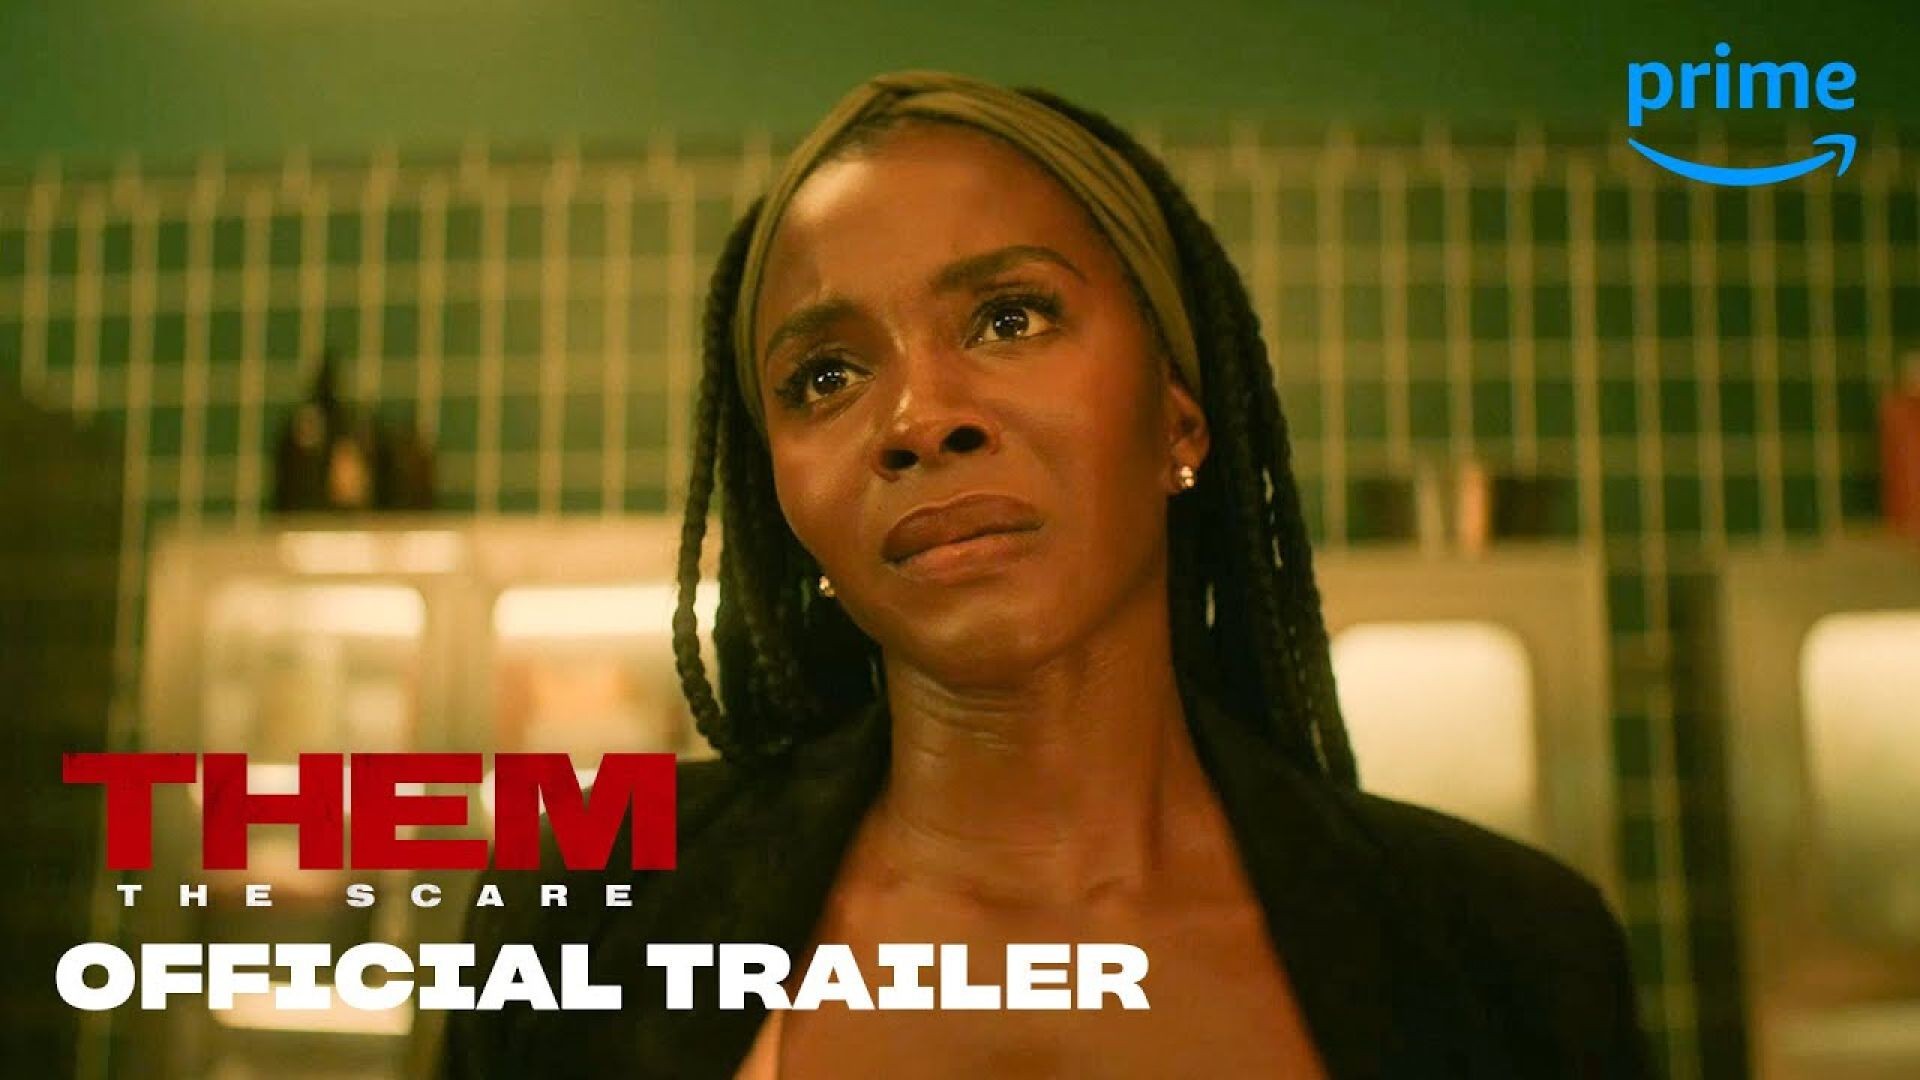 ⁣Them: The Scare - Official Trailer | Prime Video